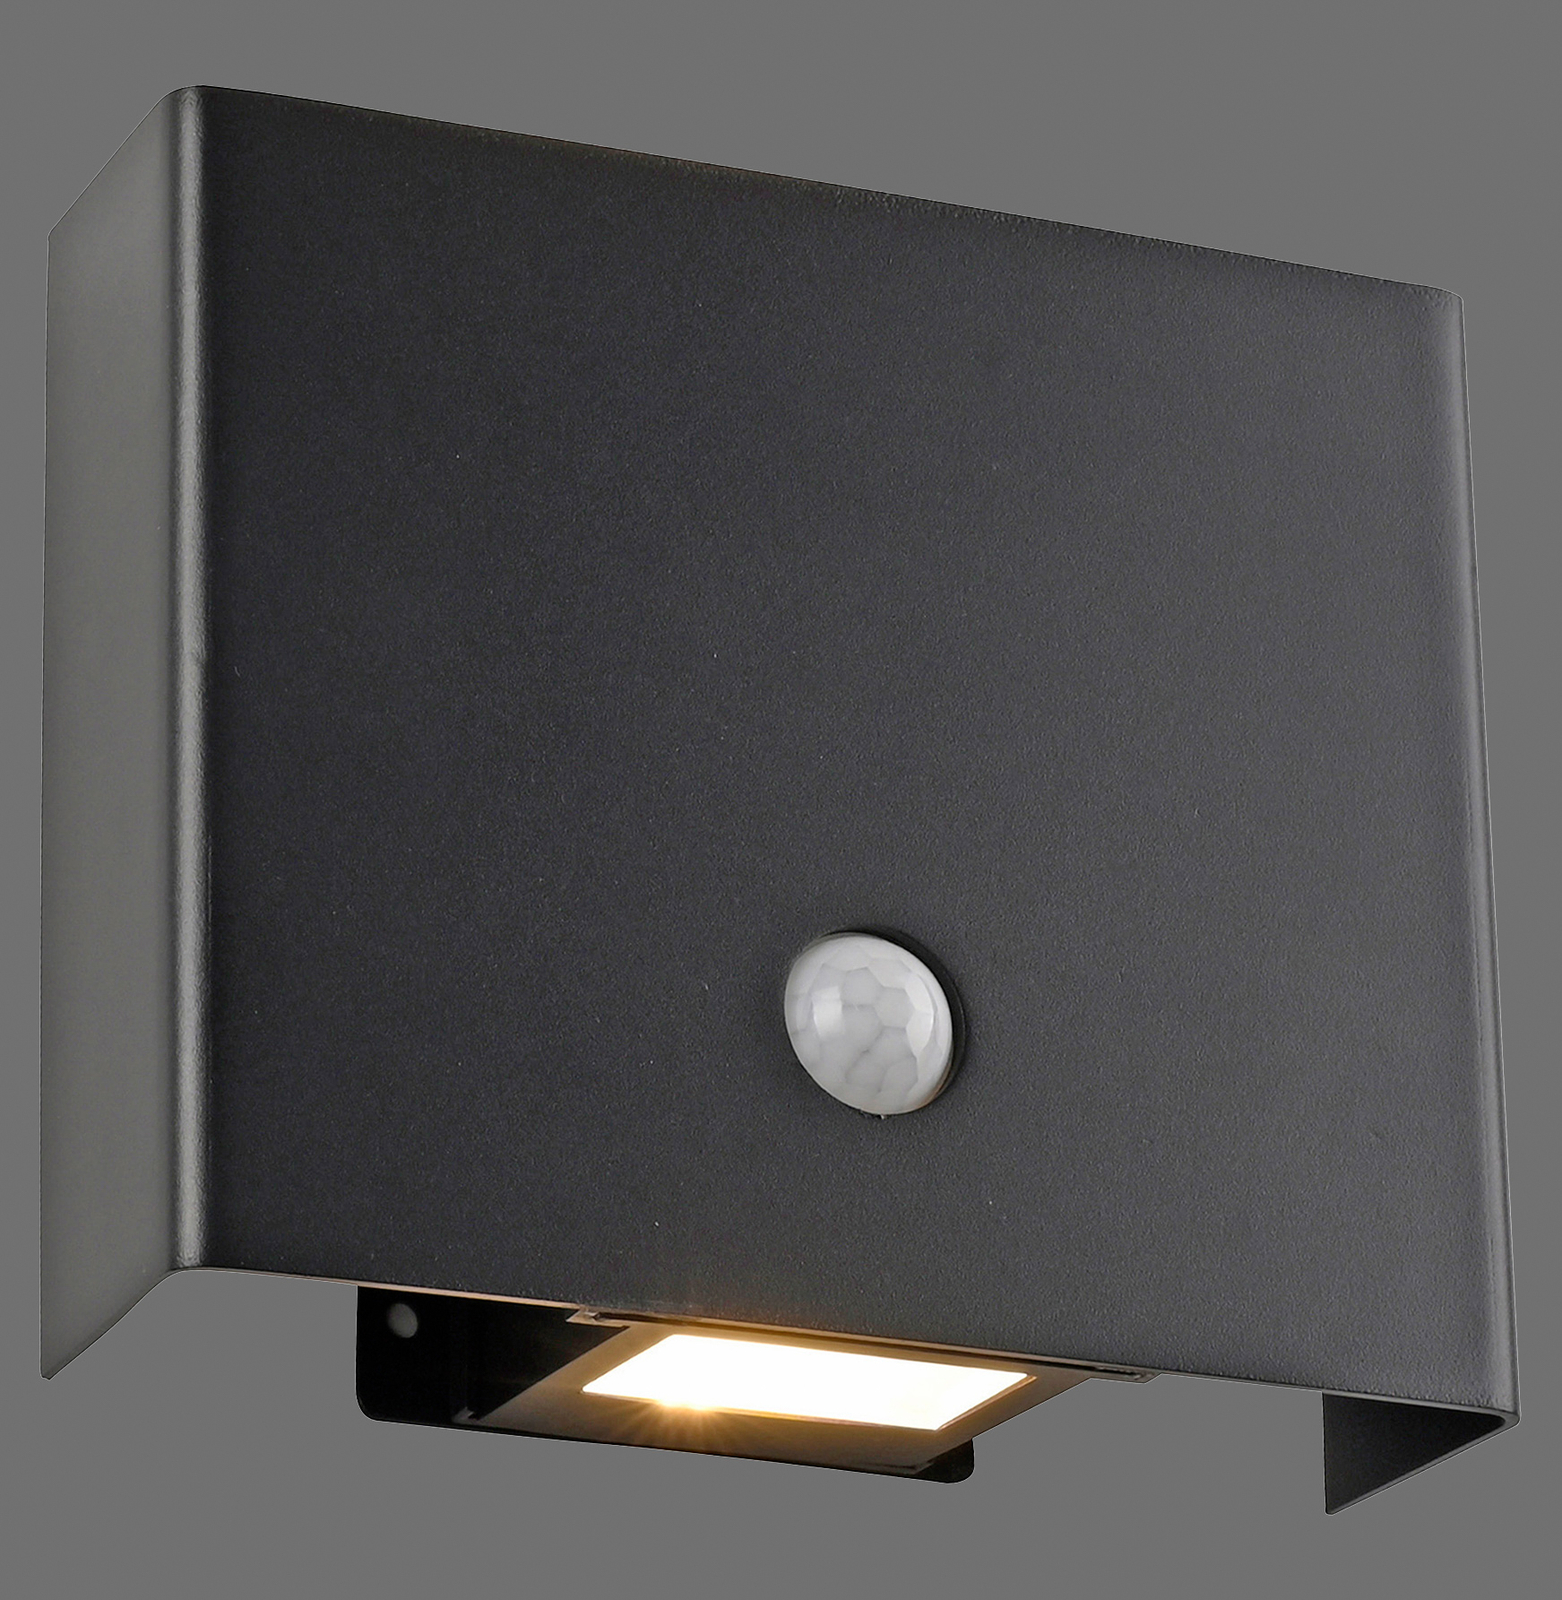 JUST LIGHT. LED outdoor wall lamp Amin, rechargeable battery black